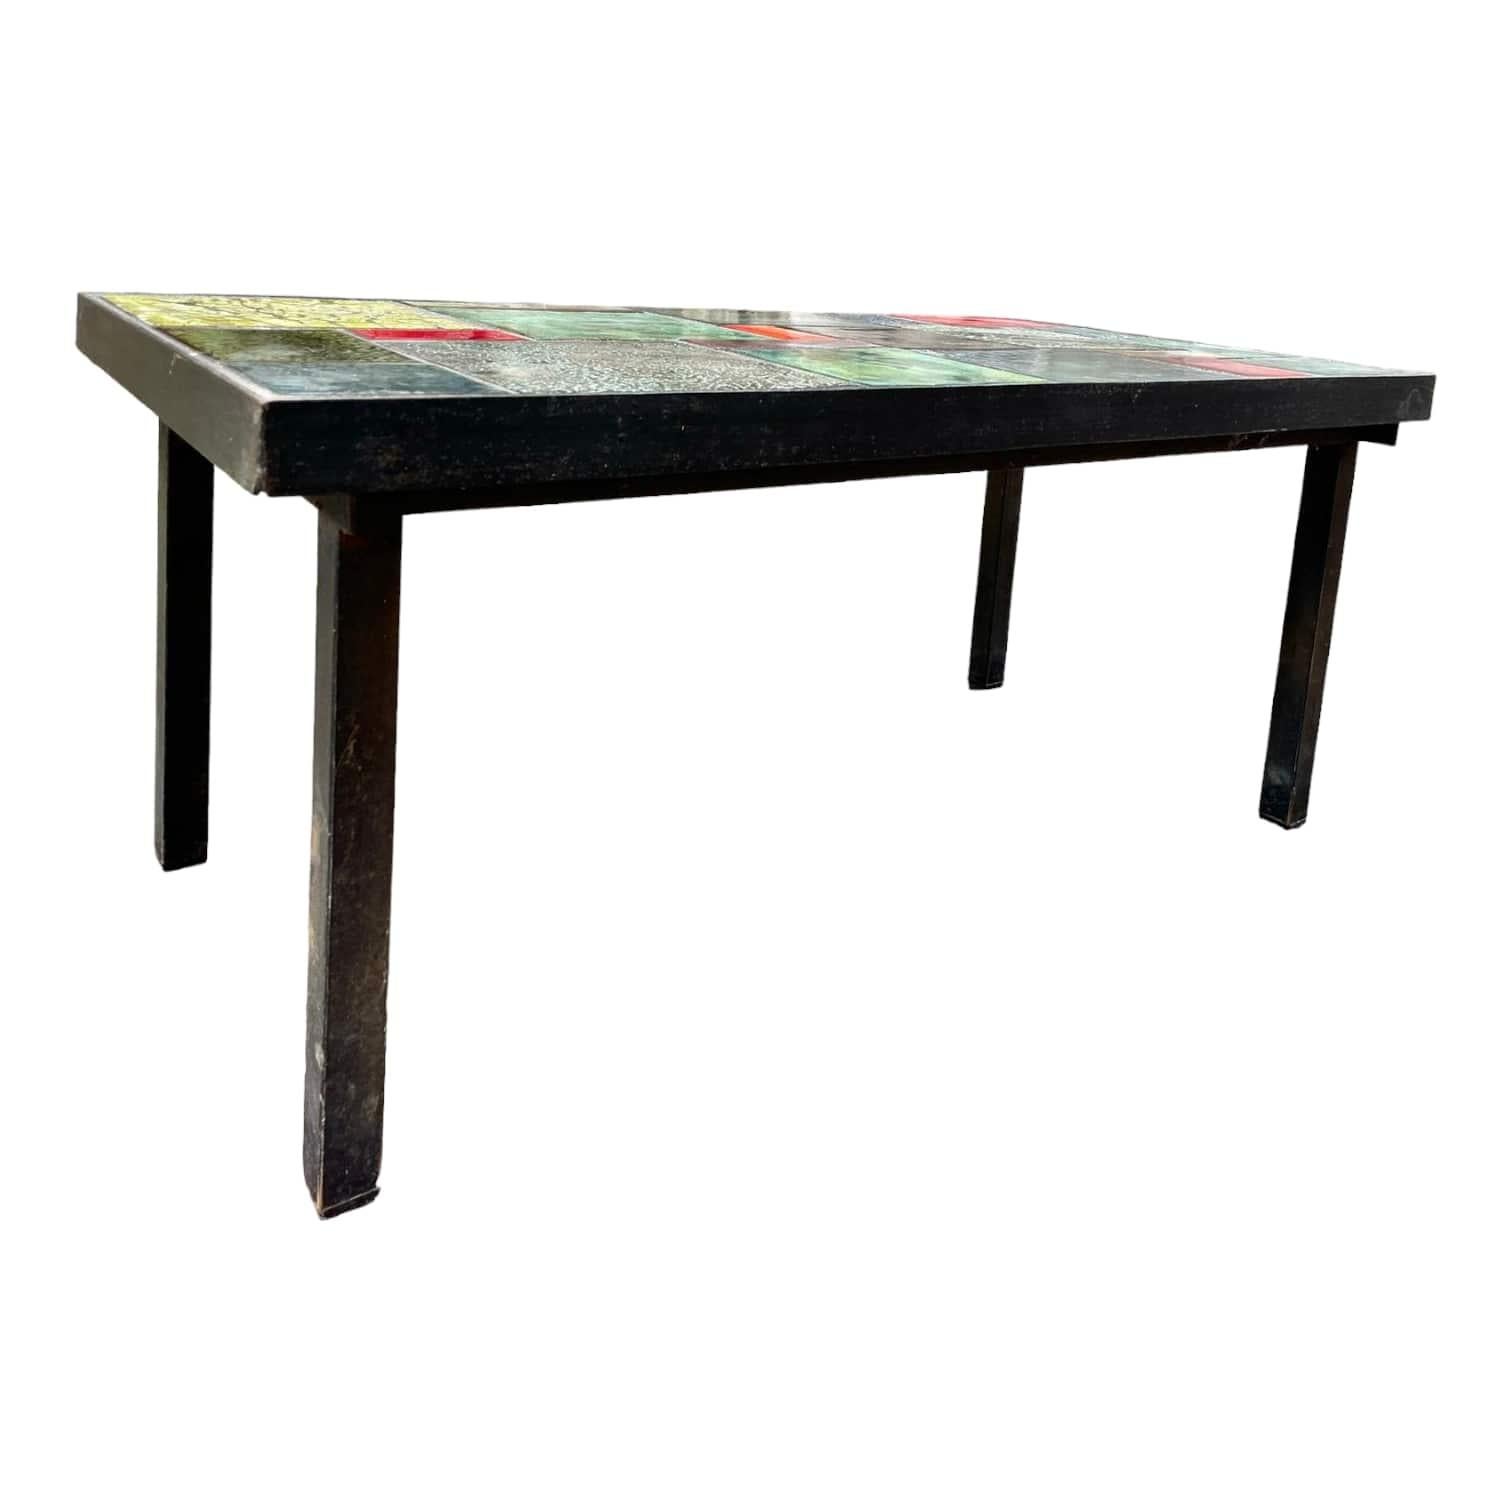 Discover these superb French ceramist coffee table designed around 1970, which will bring a touch of elegance and charm to your interior. Each piece is carefully selected for its quality and authenticity, ensuring added value to your collection. The